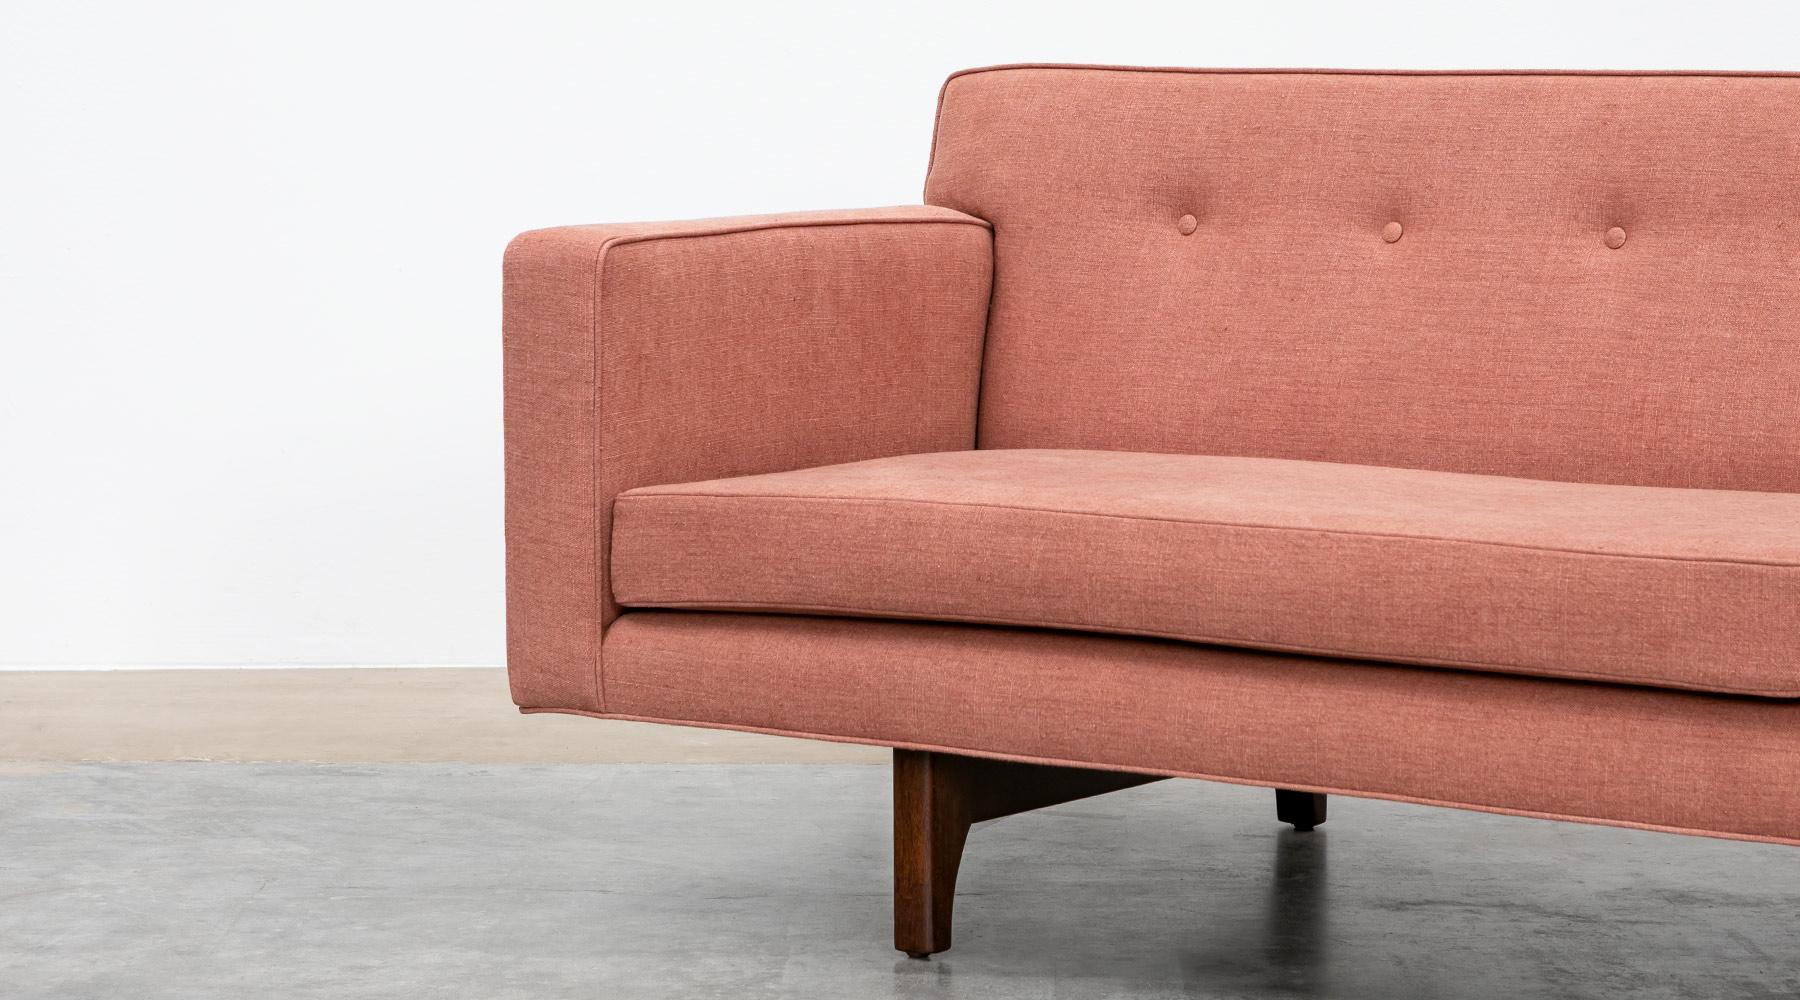 1950s Warm Pink Edward Wormley Sofa 'c' New Upholstery For Sale 1